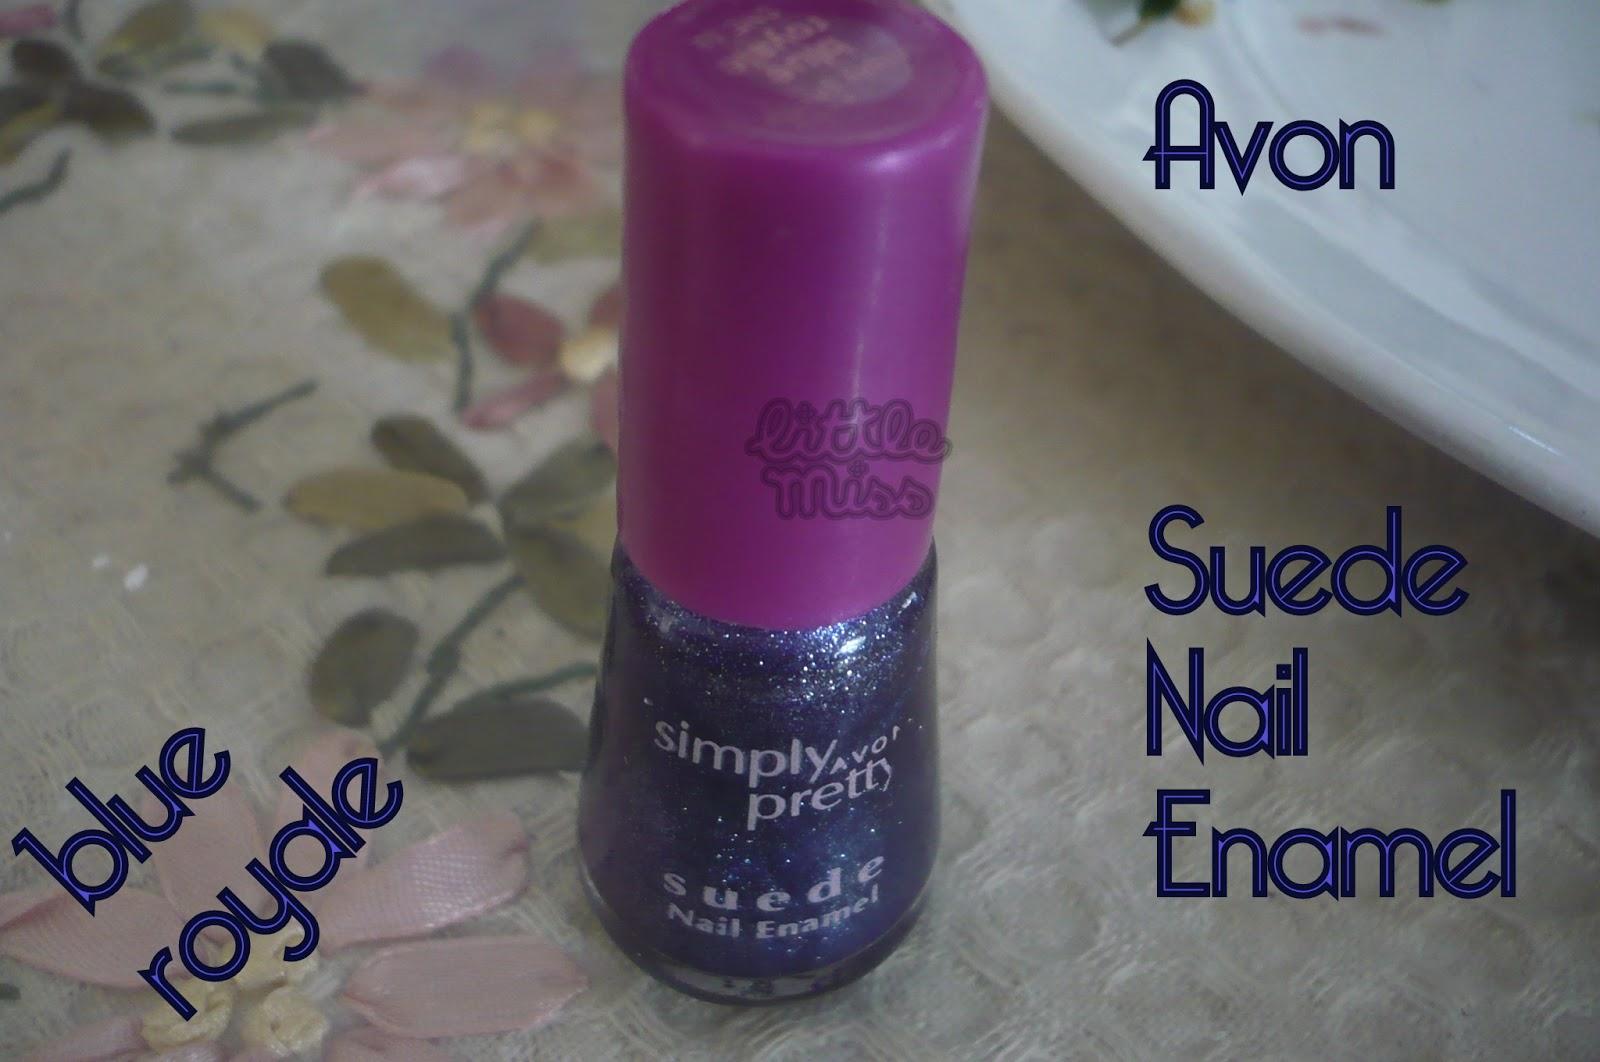 On my nails | Avon Suede Nail Enamel in Blue Royale | Review